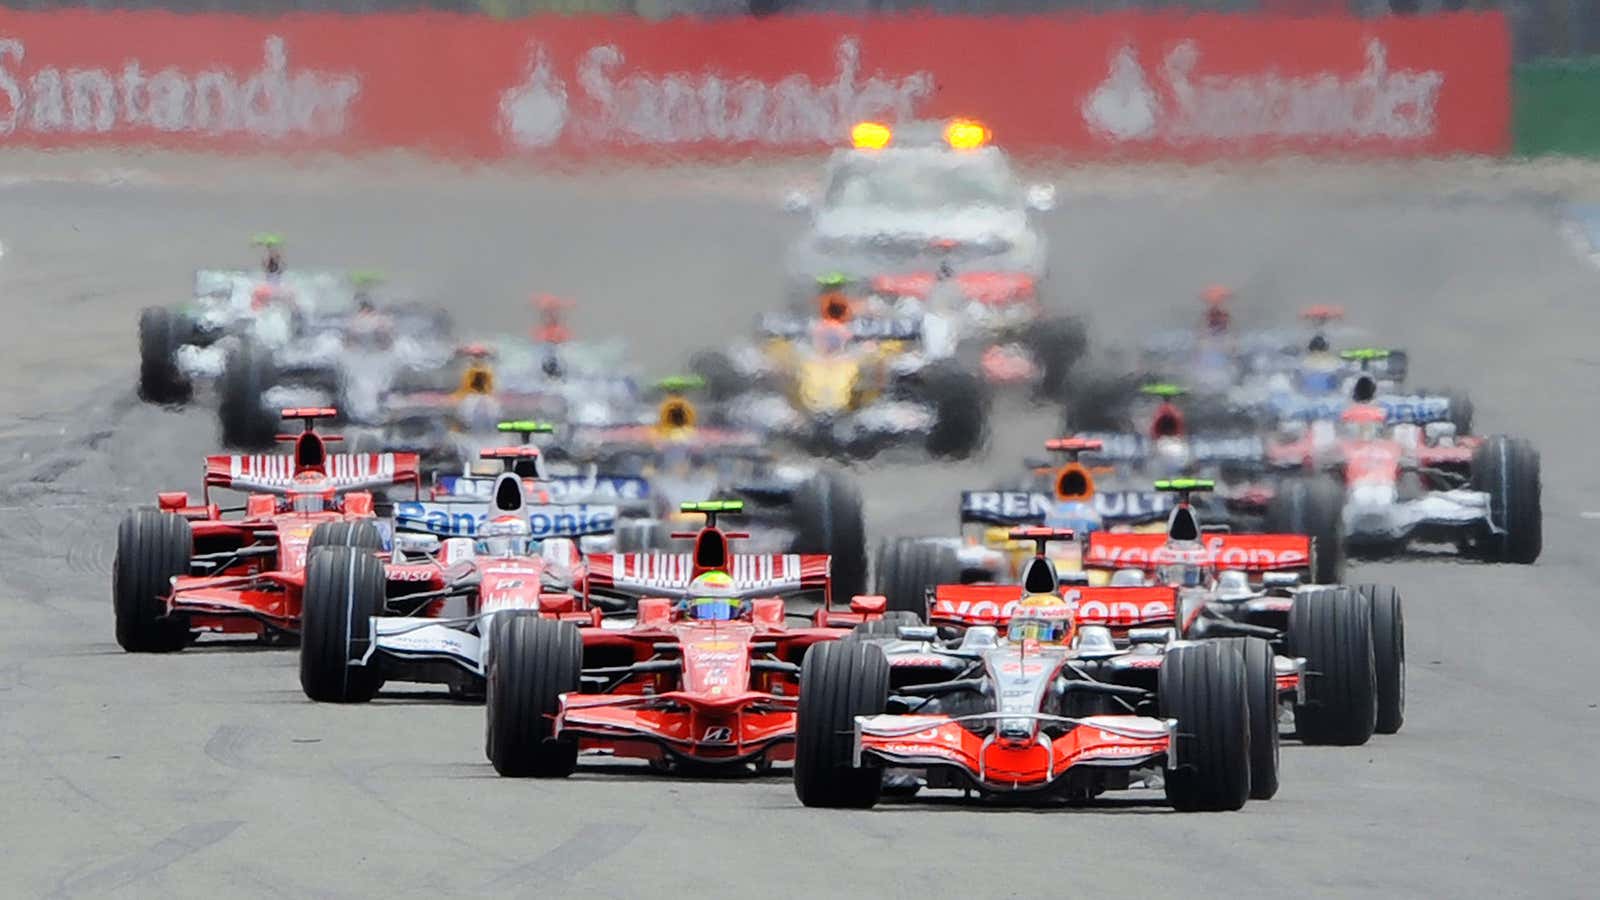 Greece races ahead with its Formula One plans